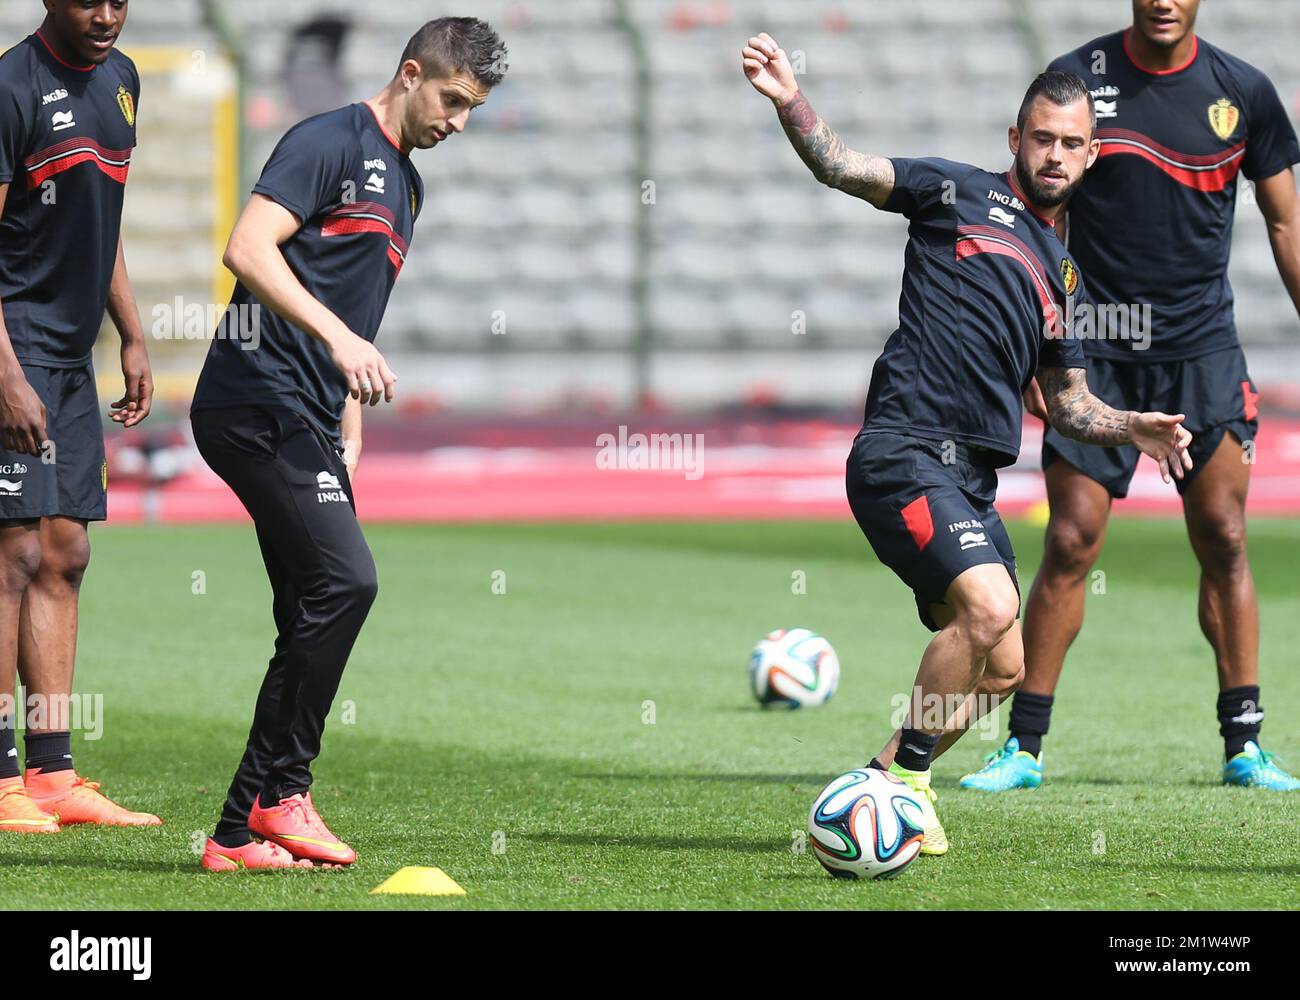 Belgium's Kevin Mirallas and Belgium's Steven Defour fight for the ball during the last training session of the Belgian national soccer team Red Devils before their departure to the World Cup in Brazil, on Sunday 08 June 2014, in Brussels. The 2014 Fifa World Cup takes place from 12 June till 13 July in Brazil. BELGA PHOTO VIRGINIE LEFOUR Stock Photo